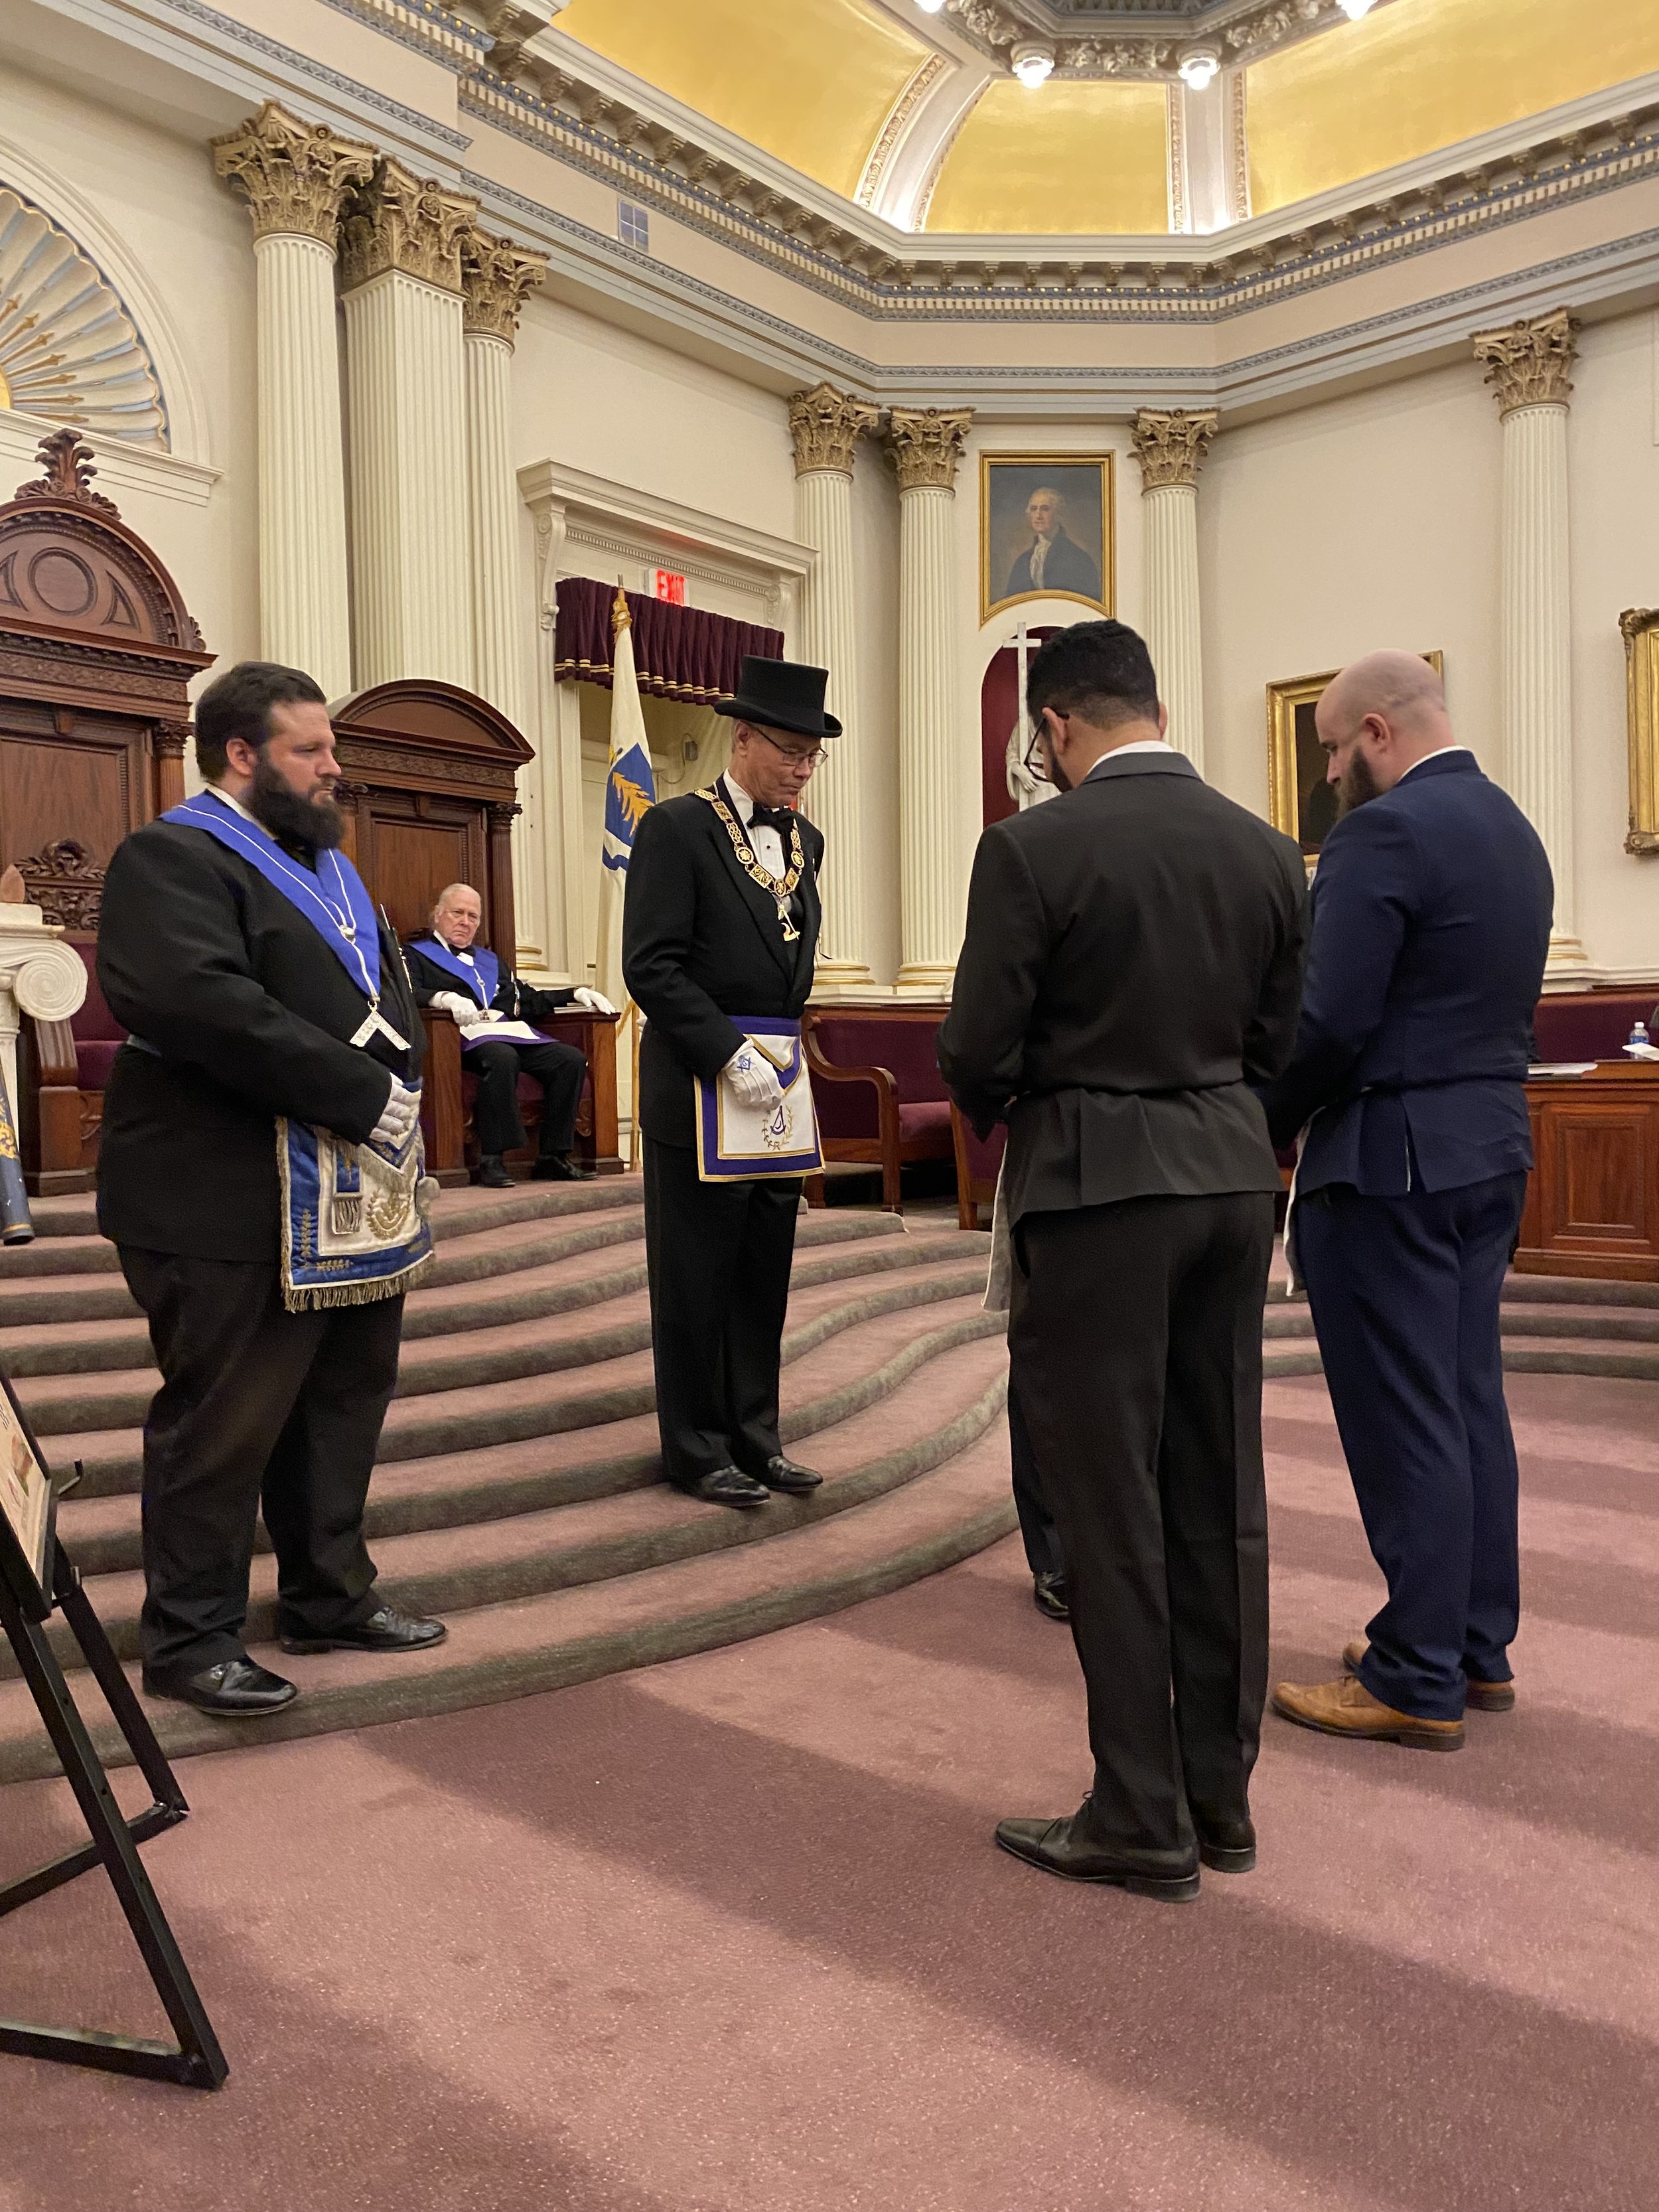  The newest Master Masons receiving the post-degree parting gifts, including the Claudy 3rd degree book, their Masonic Passport, and the 3rd Degree cipher 